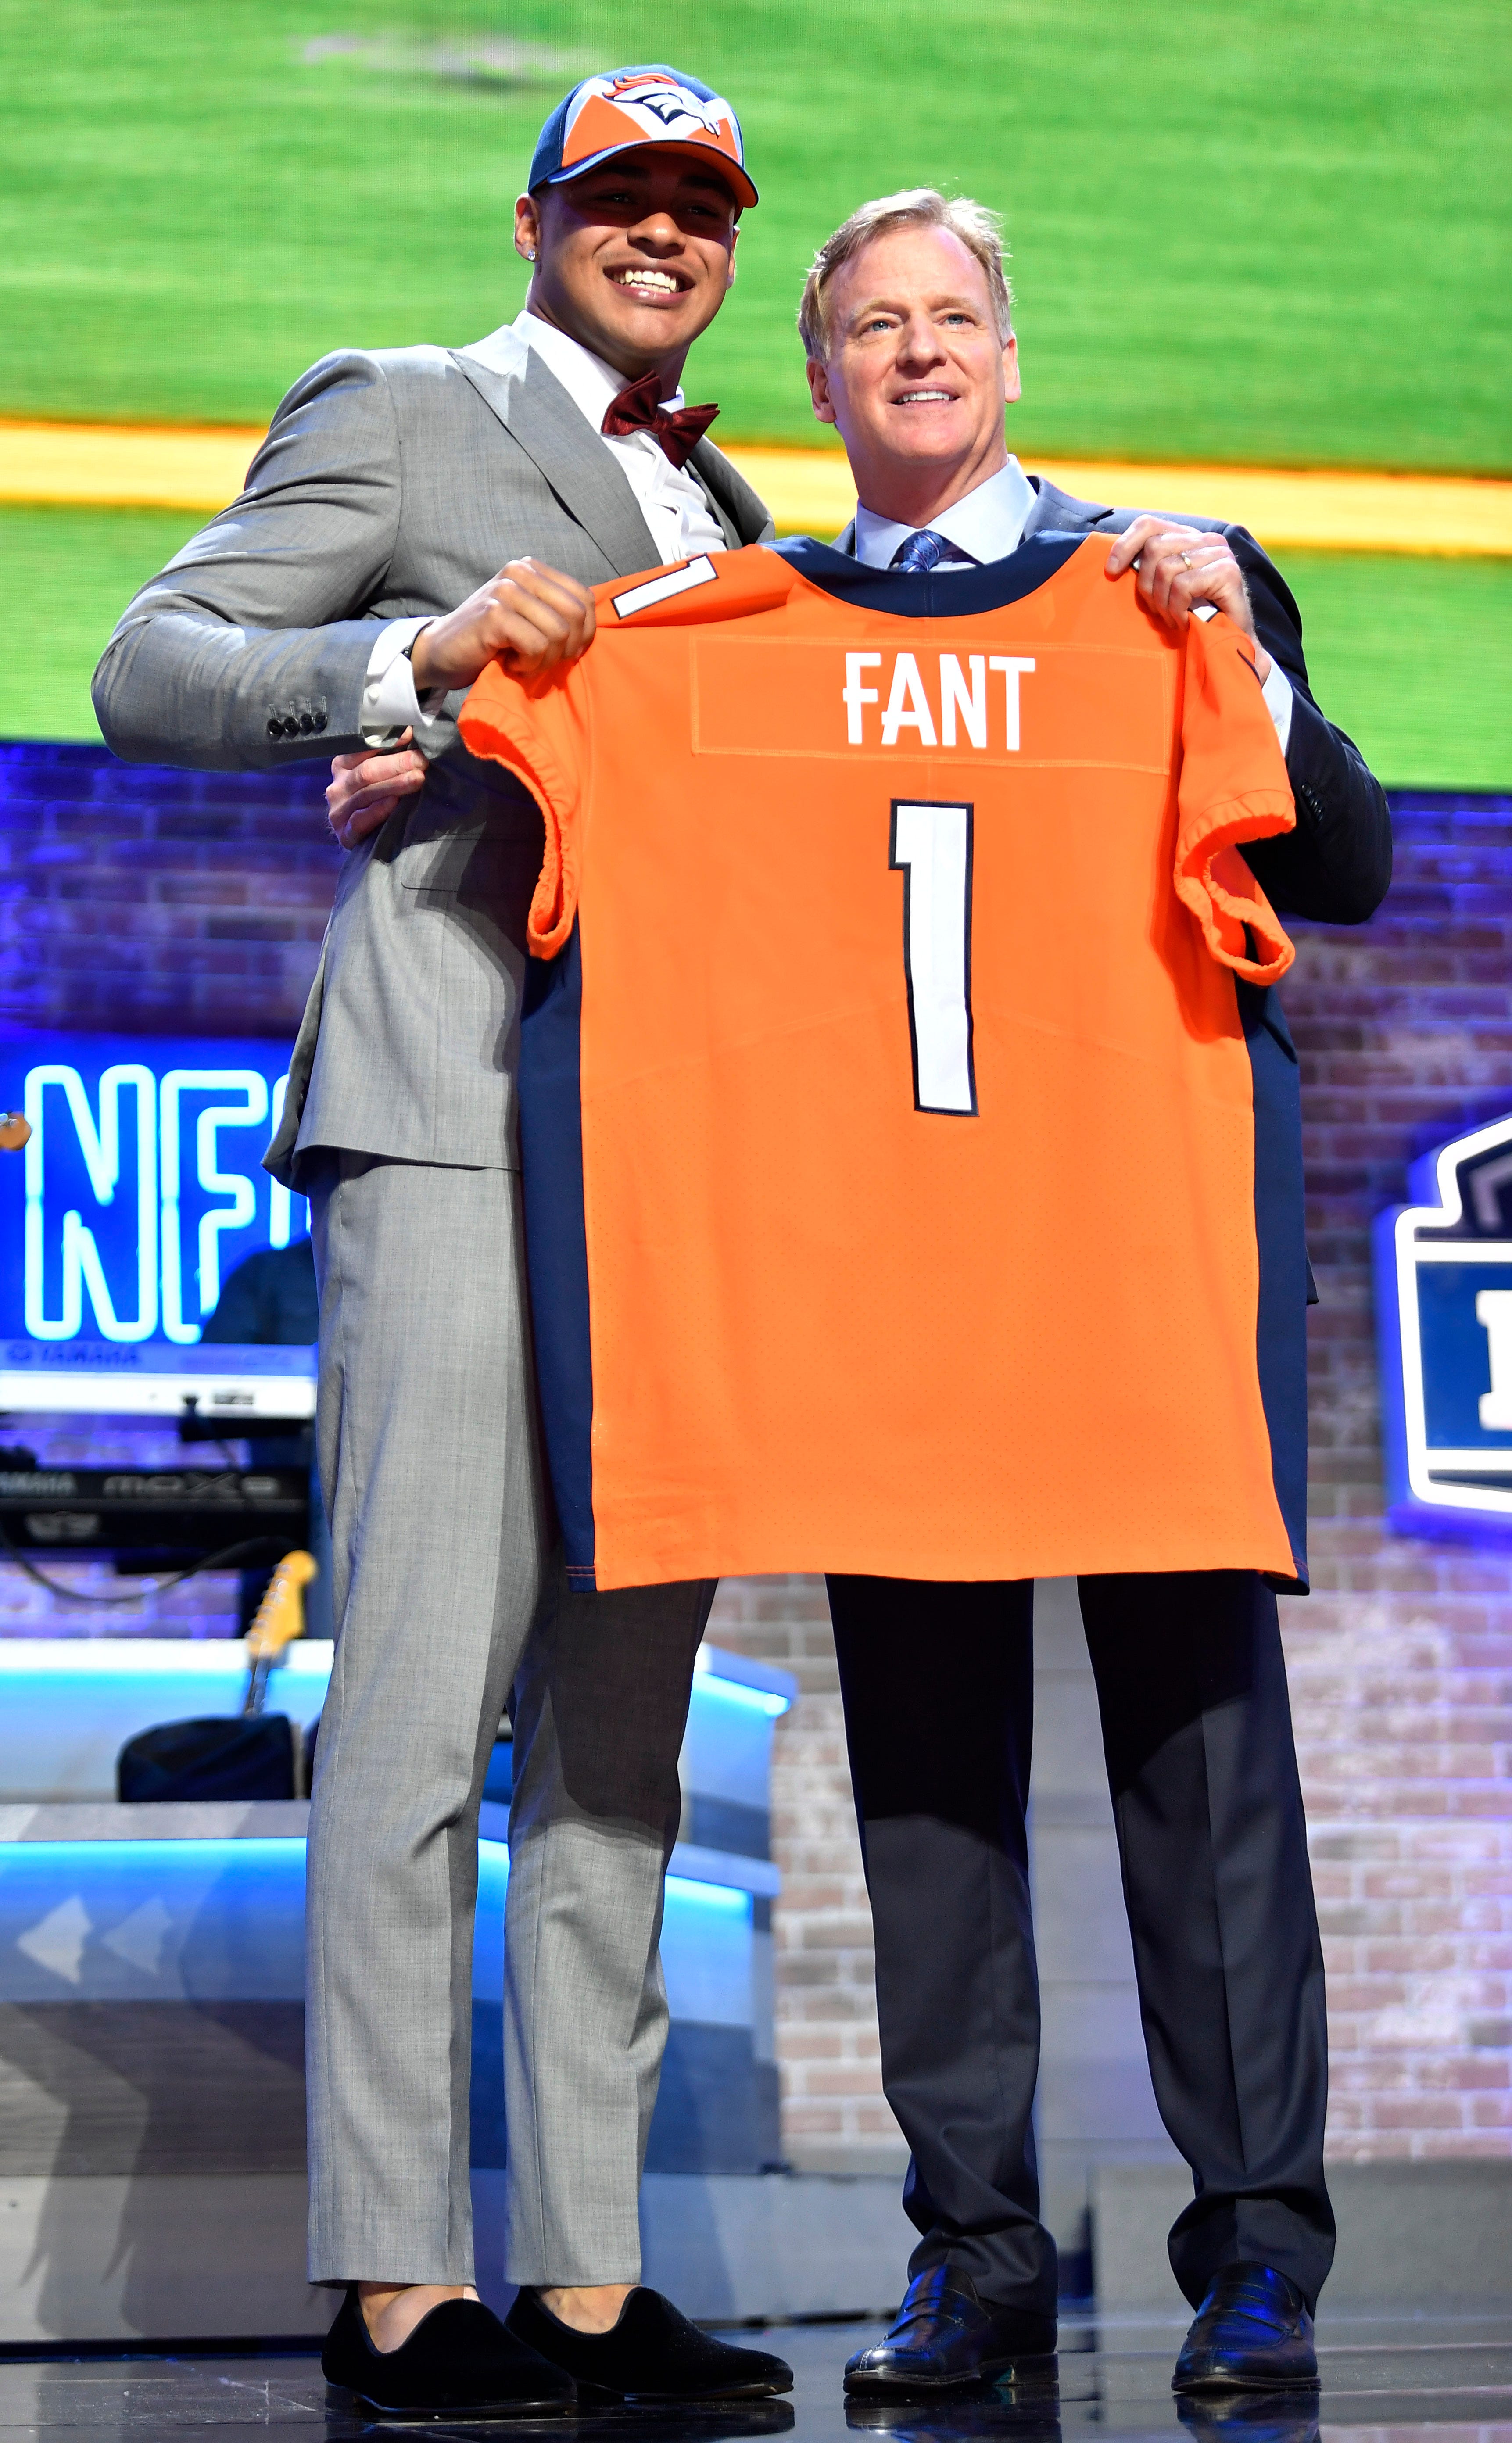 Noah Fant celebrates his pick by the Denver Broncos with NFL Commissioner Roger Goodell during the first round of the NFL Draft Thursday, April 25, 2019, in Nashville, Tenn.